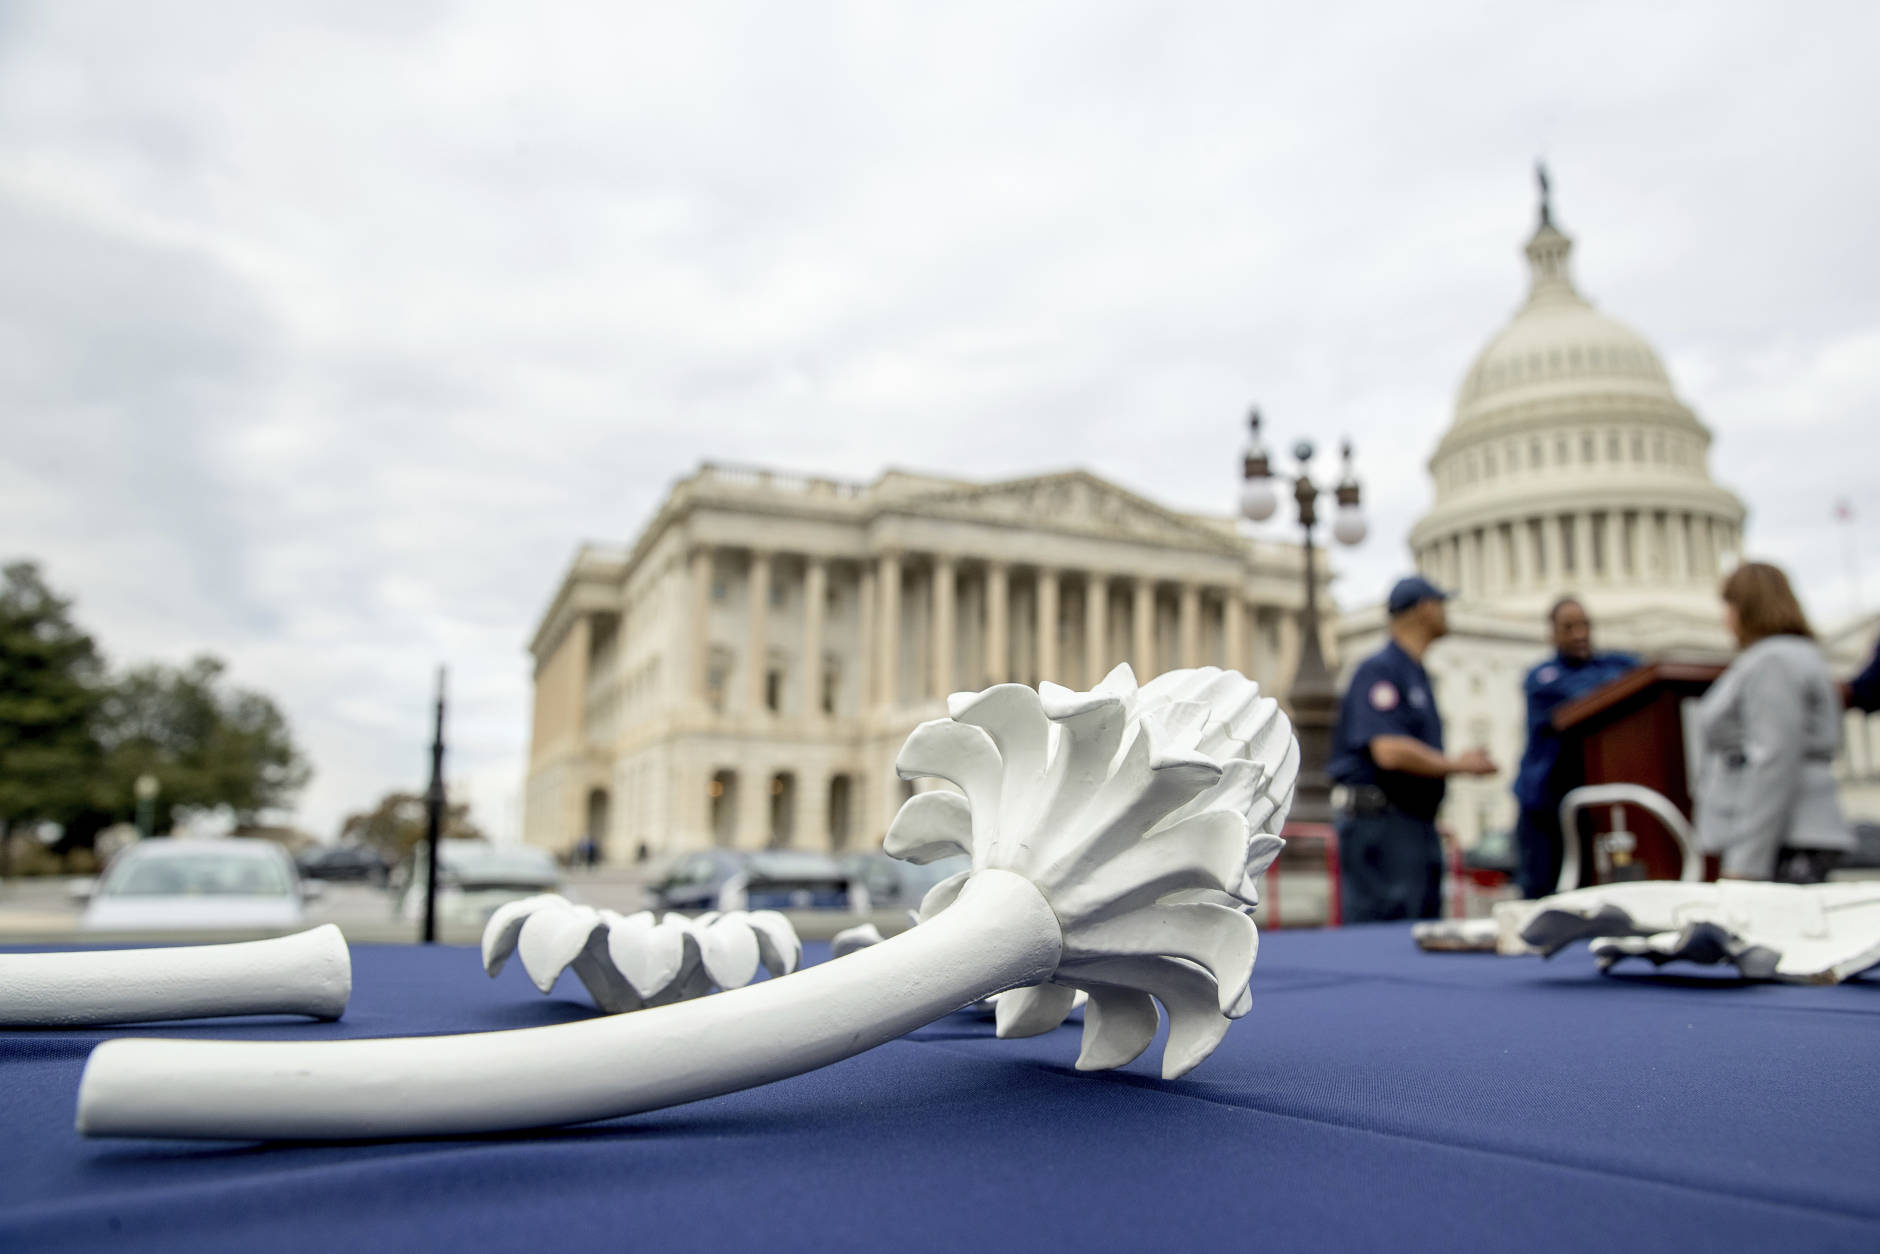 Iron pieces are displayed at a news conference on Capitol Hill in Washington, Tuesday, Nov. 15, 2016, to announce the successful completion of the U.S. Capitol Dome Restoration Project. (AP Photo/Andrew Harnik)